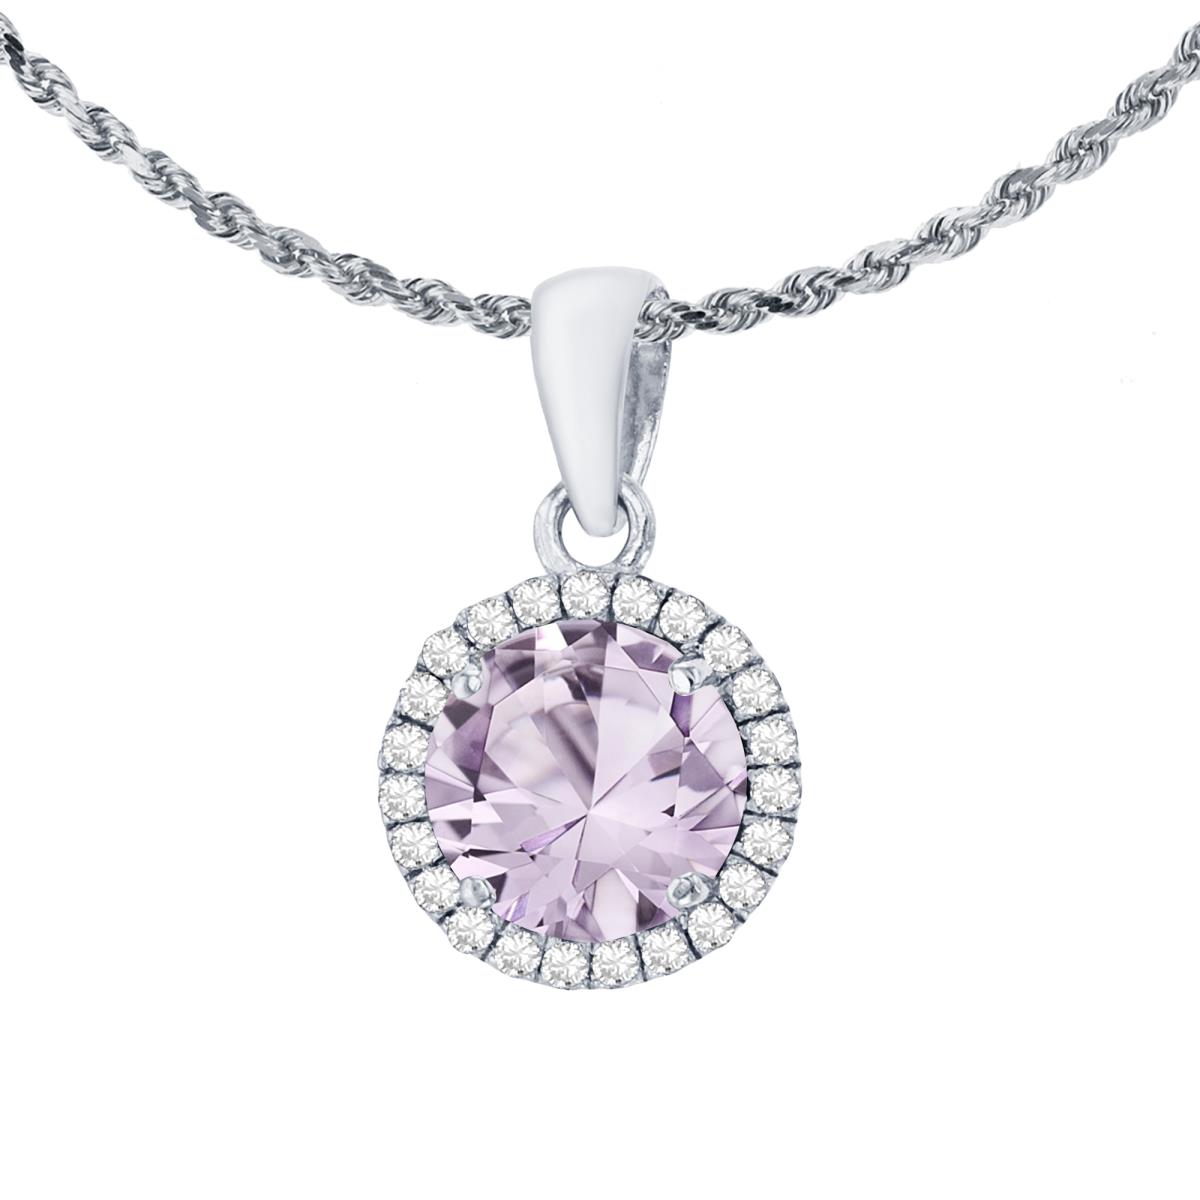 14K White Gold 7mm Round Rose De France & 0.12 CTTW Diamond Halo 18" Rope Chain Necklace